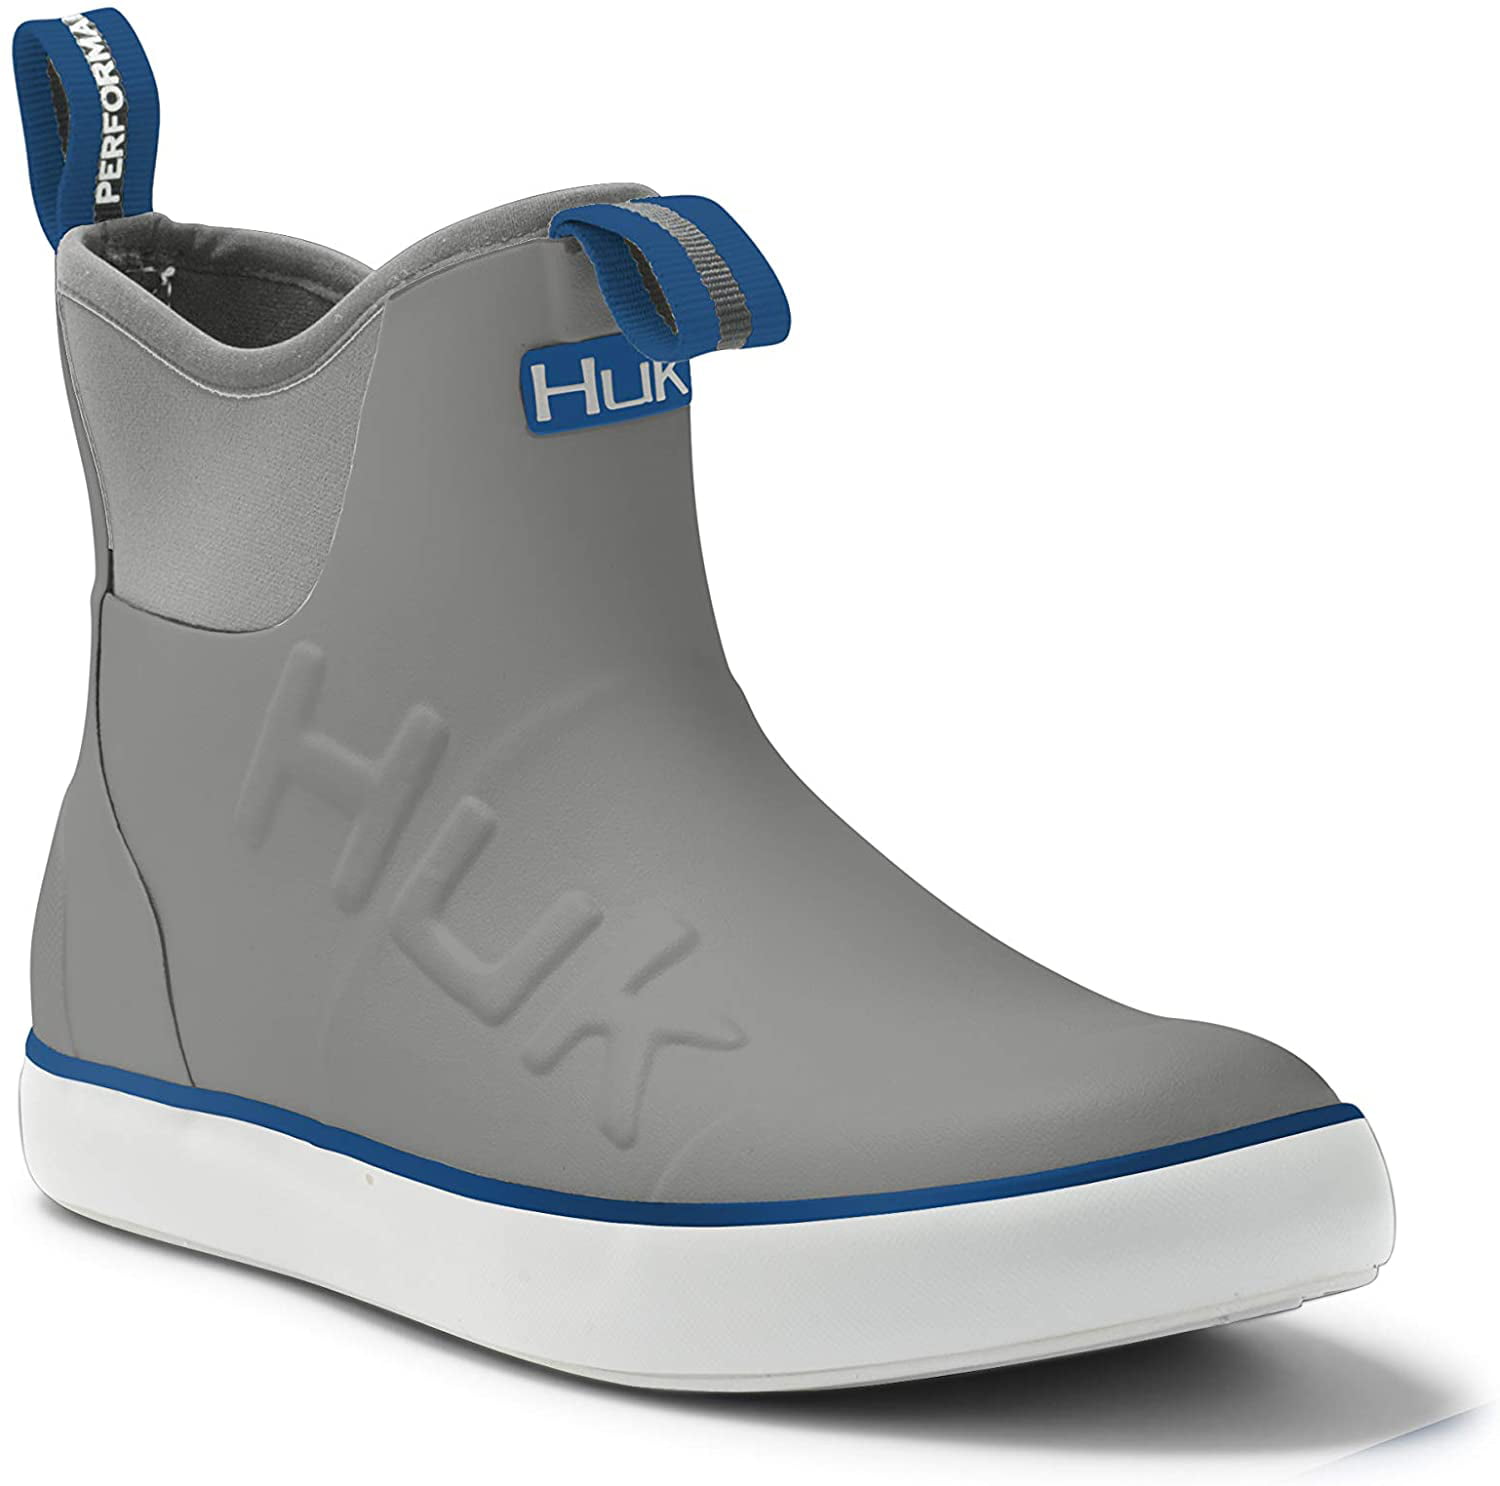 Huk Men's Rogue Wave White Size 14 High-Performance Fishing Ankle Boots 